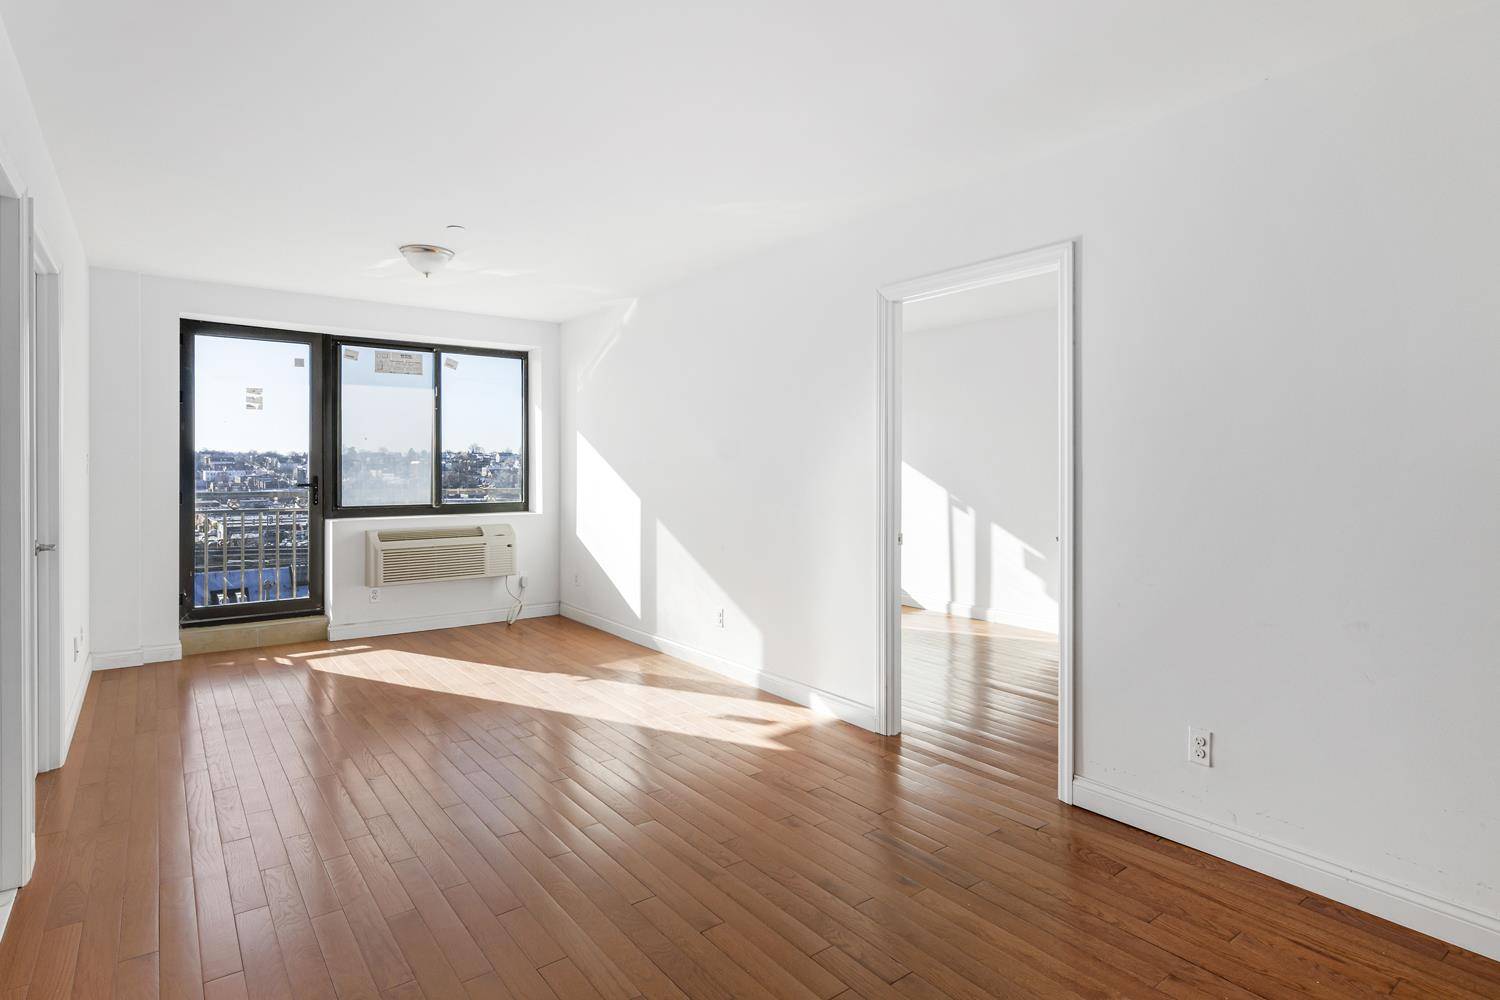 Cash buyer preferred or must put 20 downSituated on a higher floor, this 2 bed 2 bath home has a private outdoor space with Manhattan views.